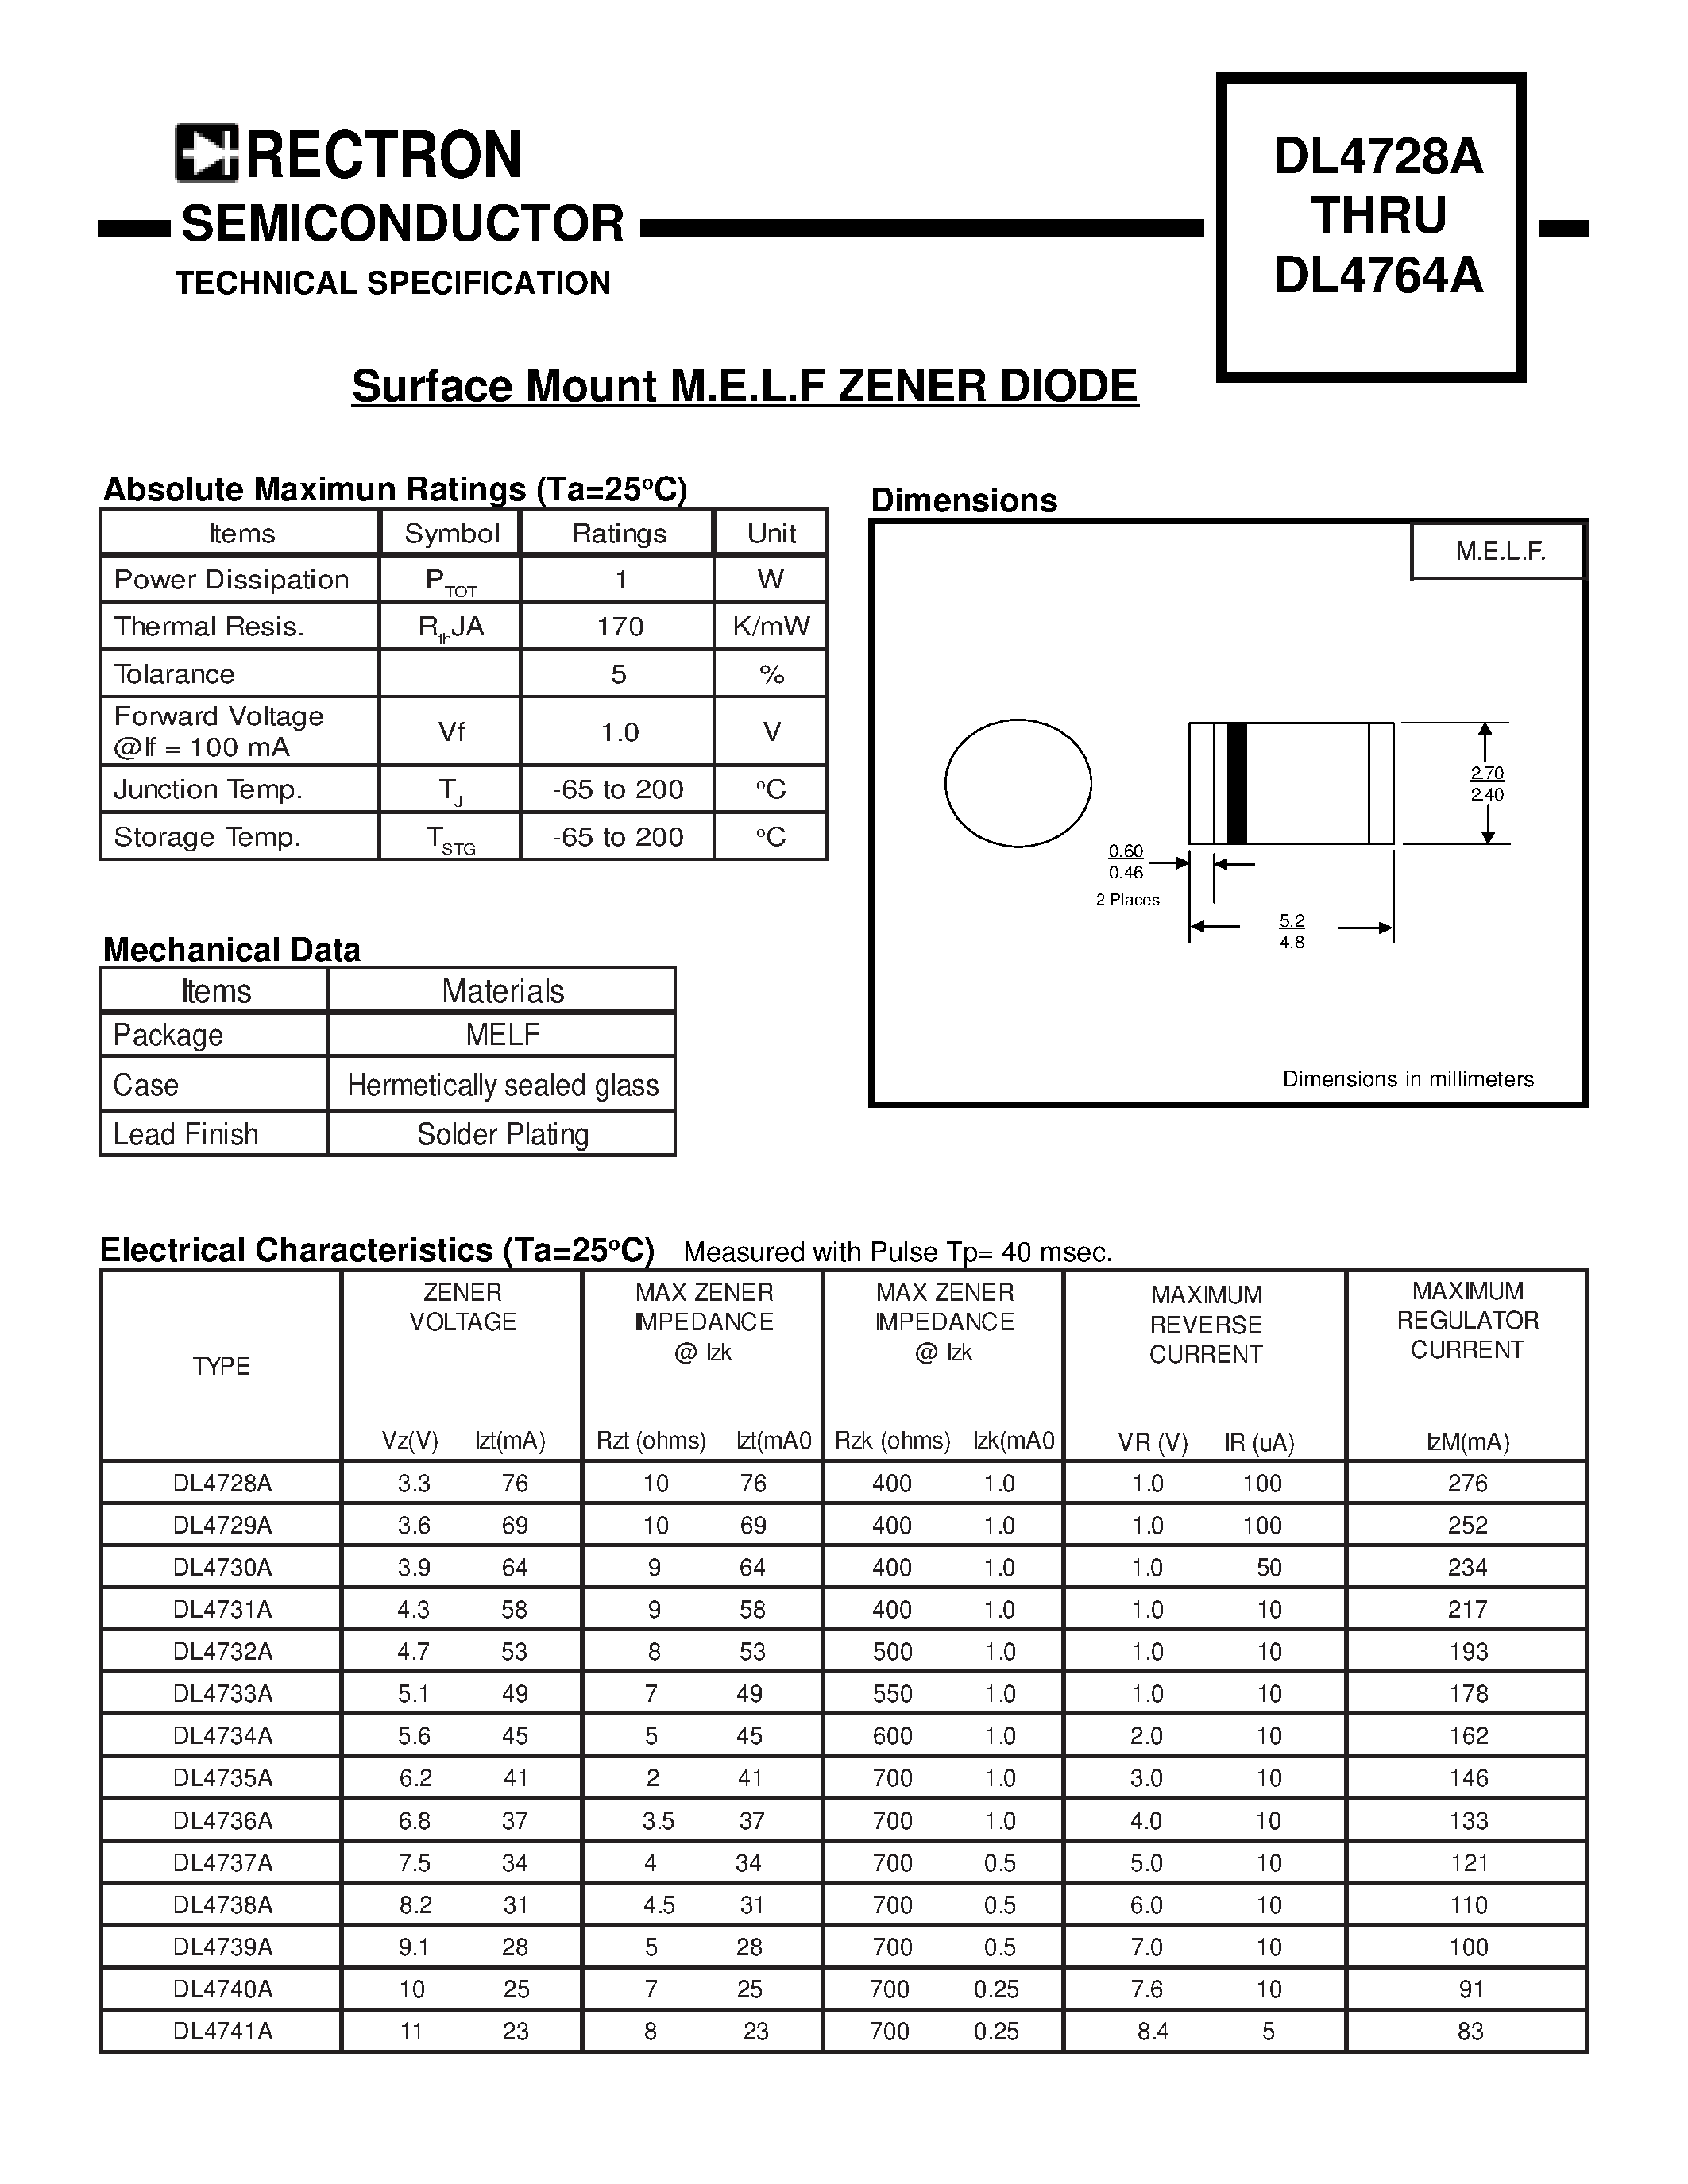 Datasheet DL4739A - Surface Mount M.E.L.F ZENER DIODE page 1